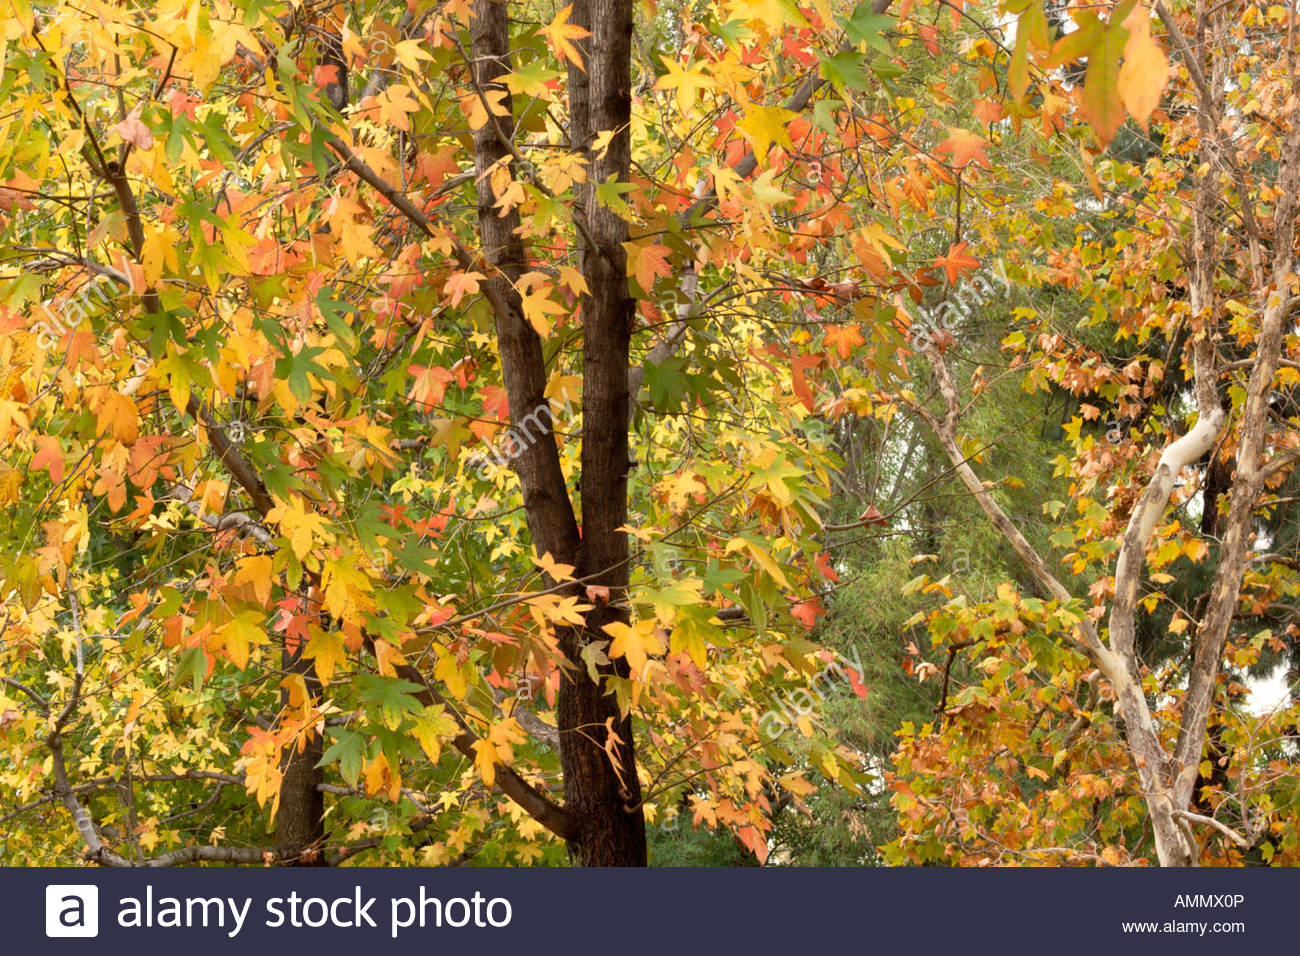 Maple Trees Fall Foliage Glendora Southern California Stock Photo Alamy,Cooking Ribs On Gas Grill Then Oven